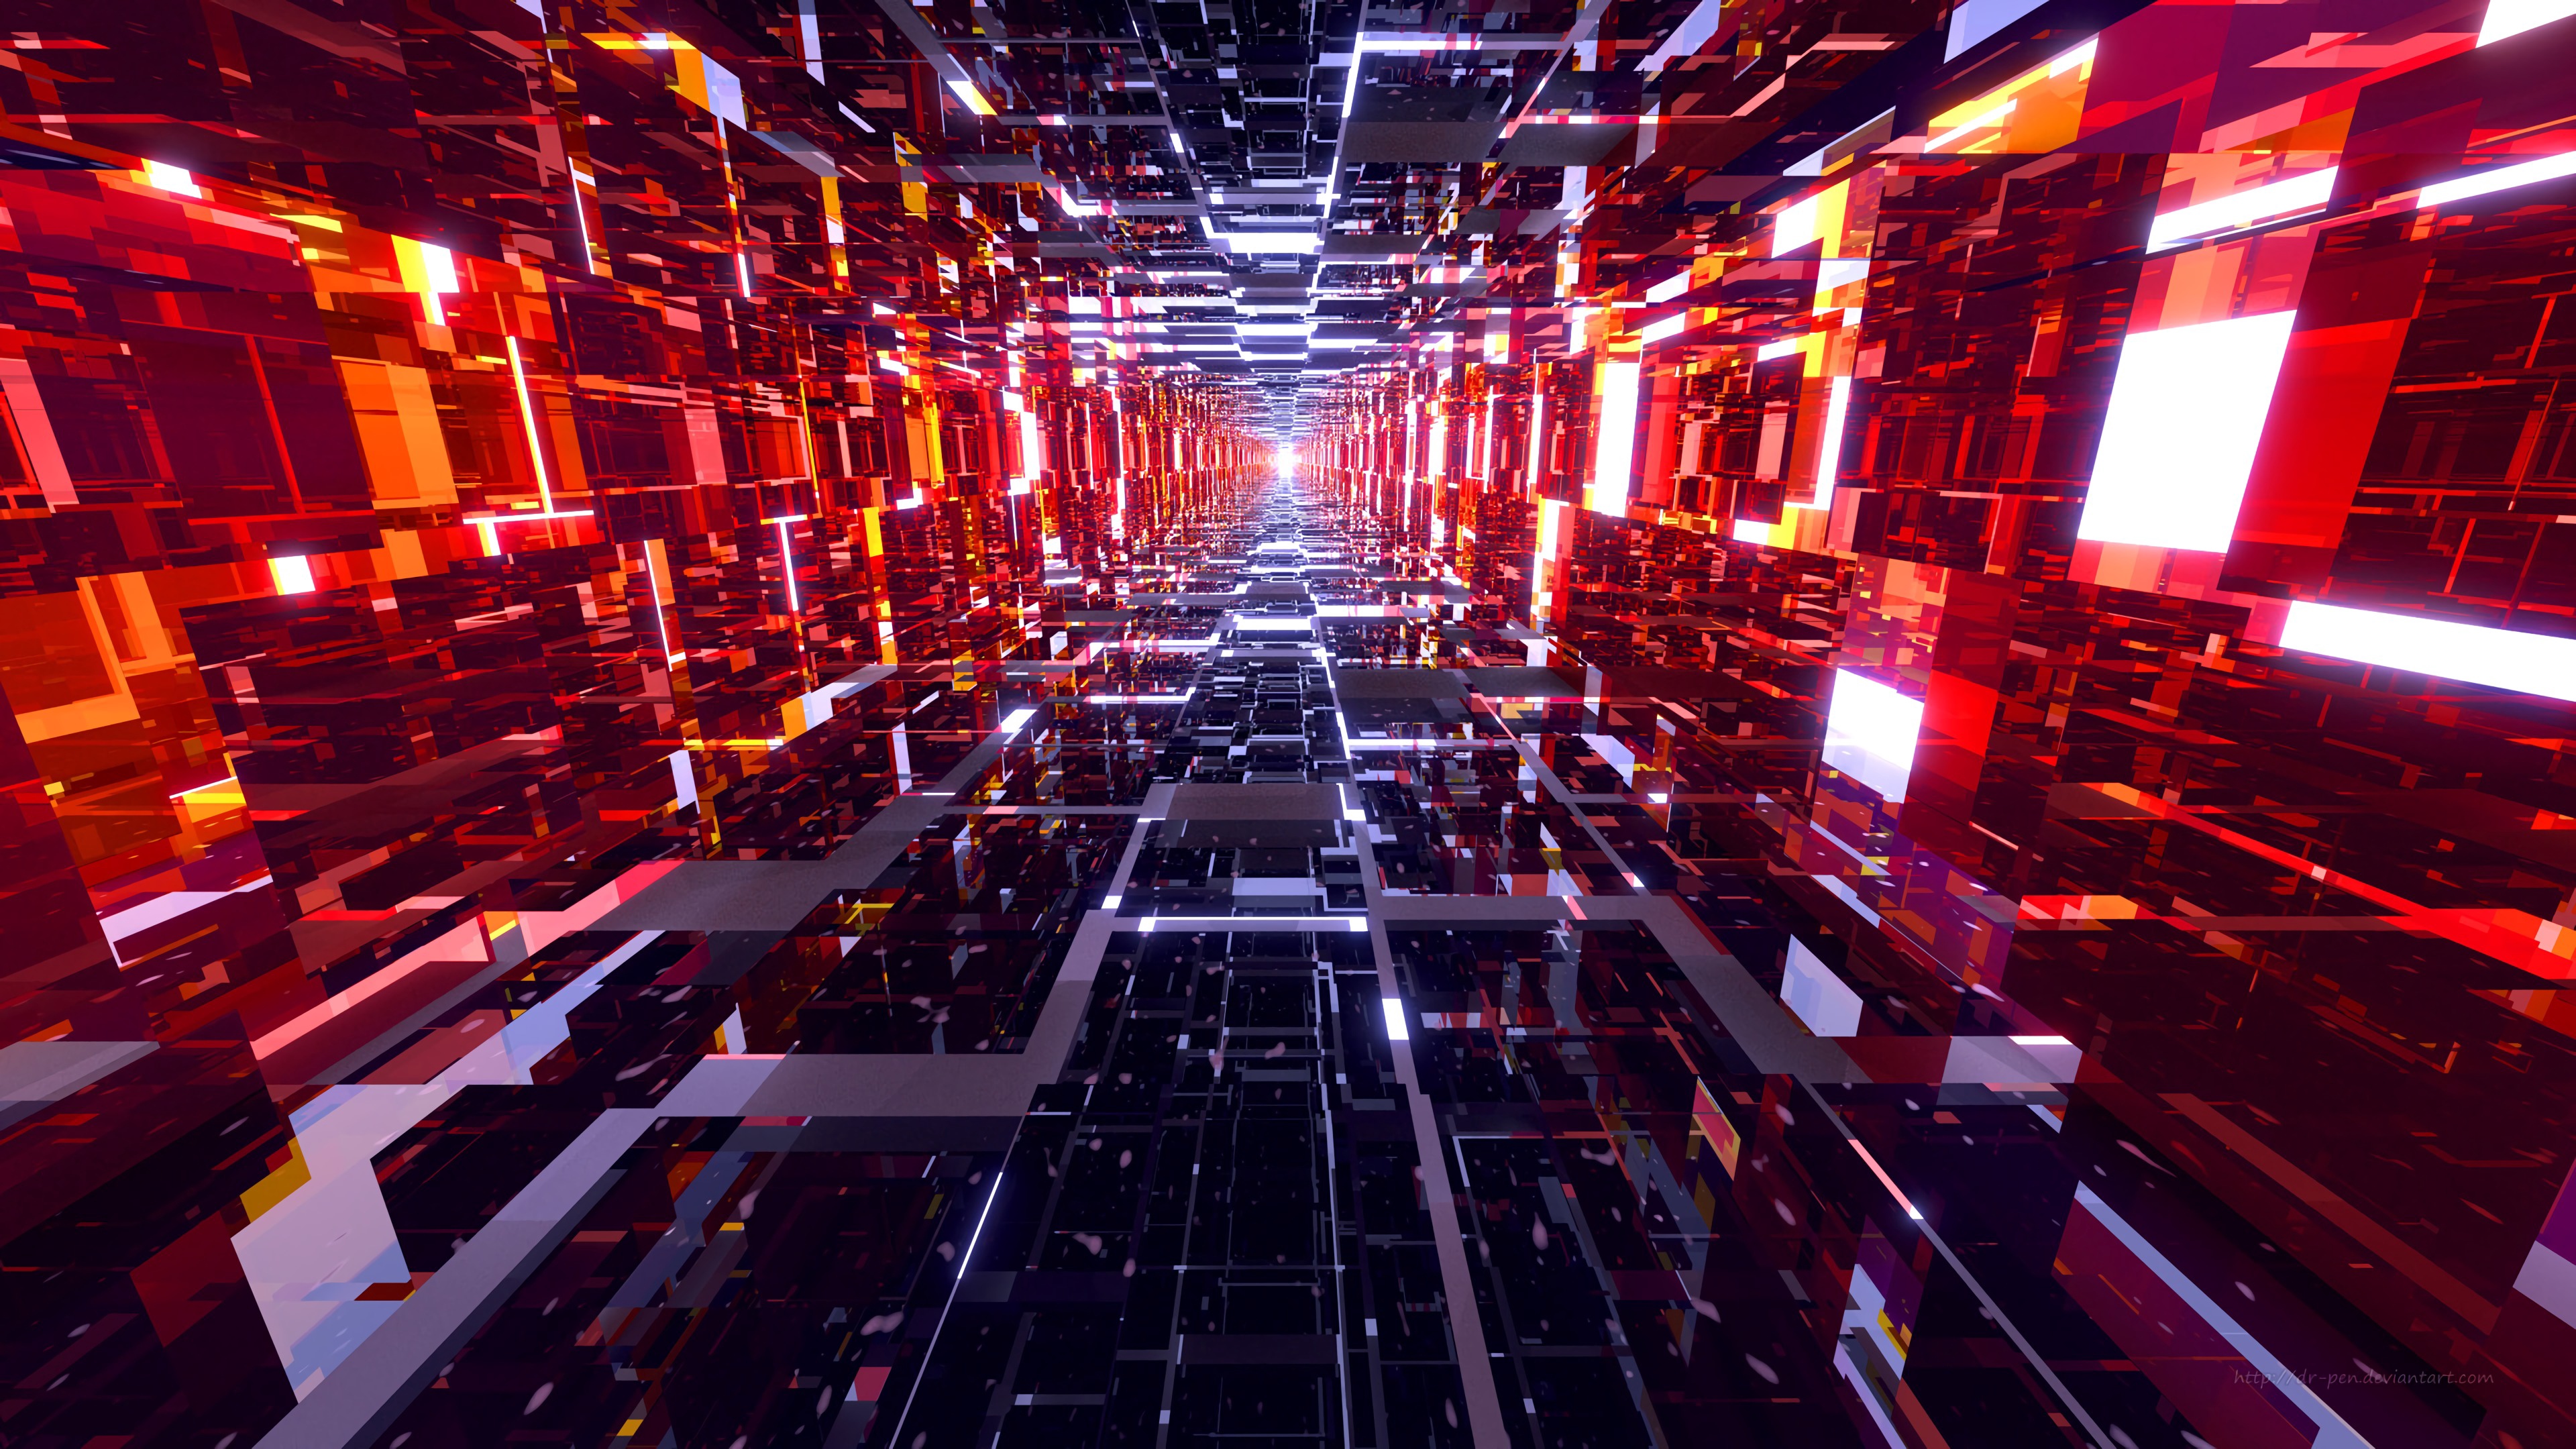 Abstract 3D Abstract Neon Tunnel Neon Glow Bright Glowing Perspective 3D Graphics 3840x2160